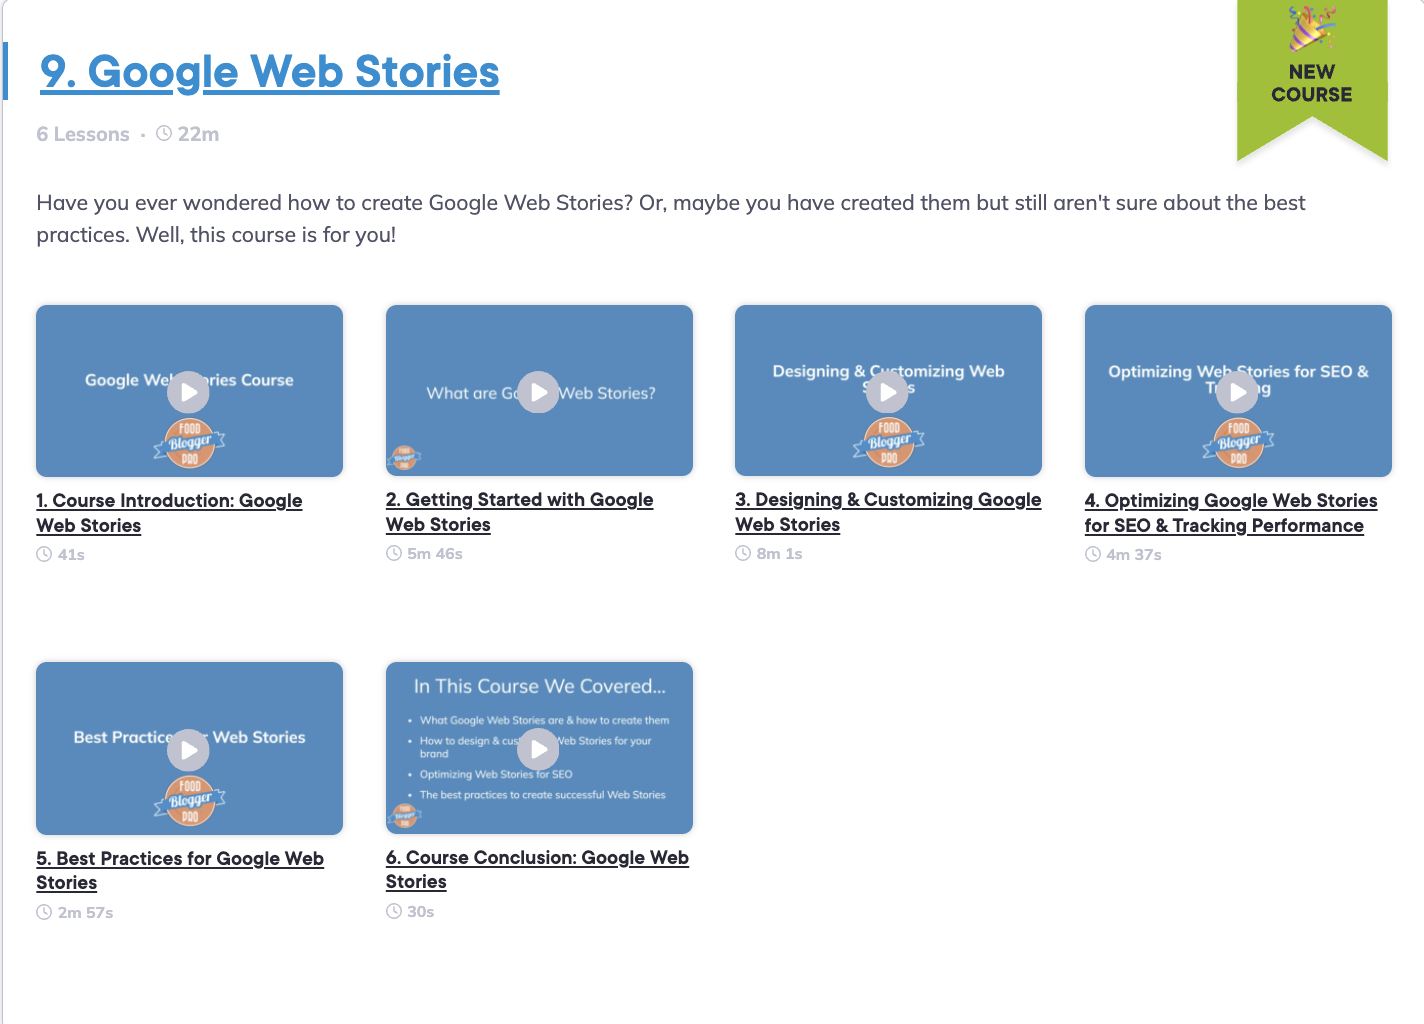 Overview of Google Web Stories course that shows the individual lessons.